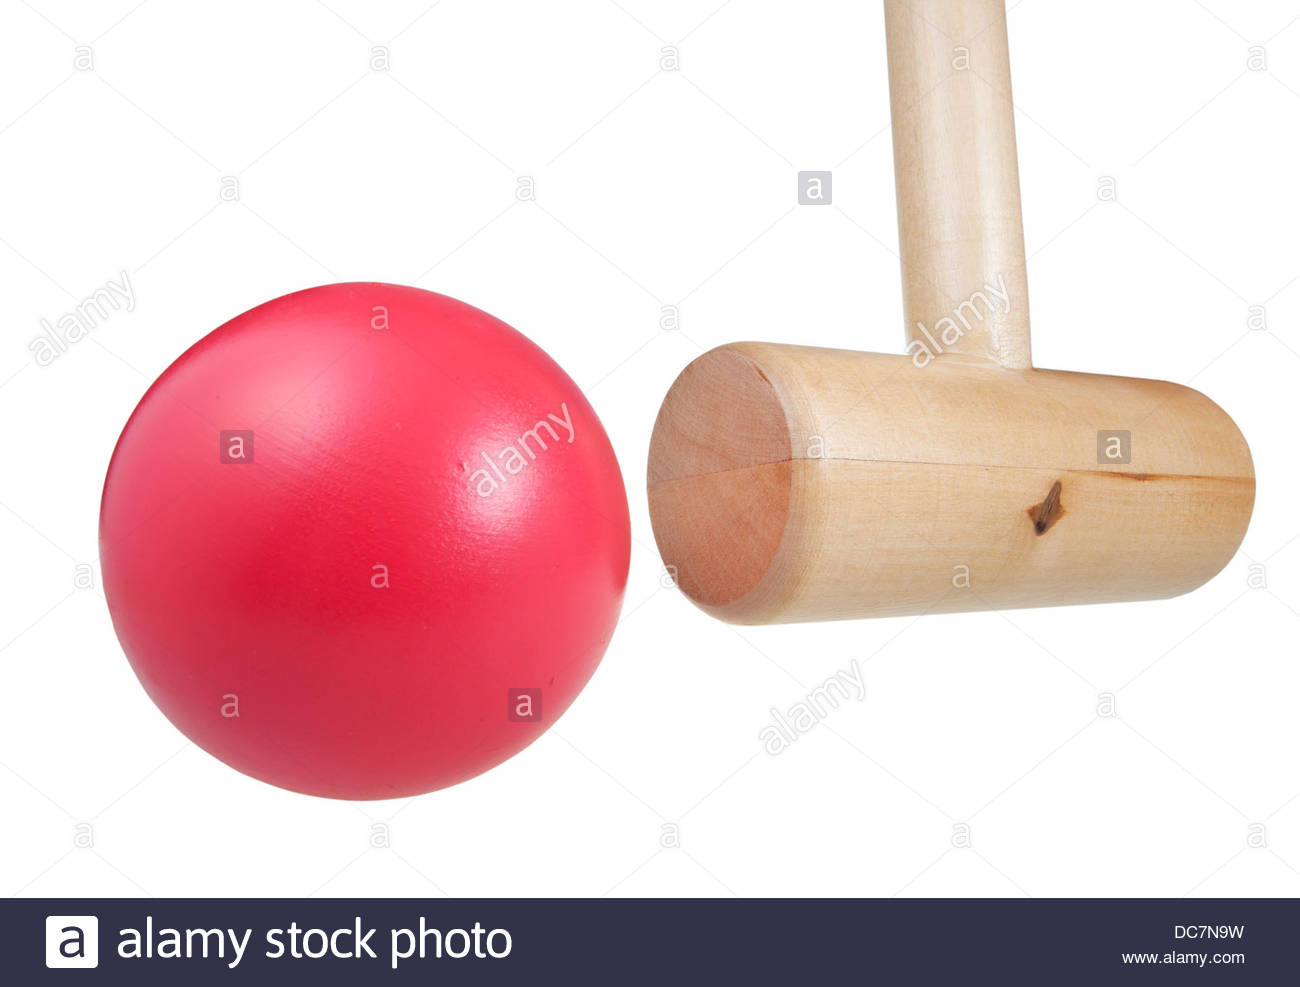 Croquet Mallet Hits Ball Close Up Isolated On White Background